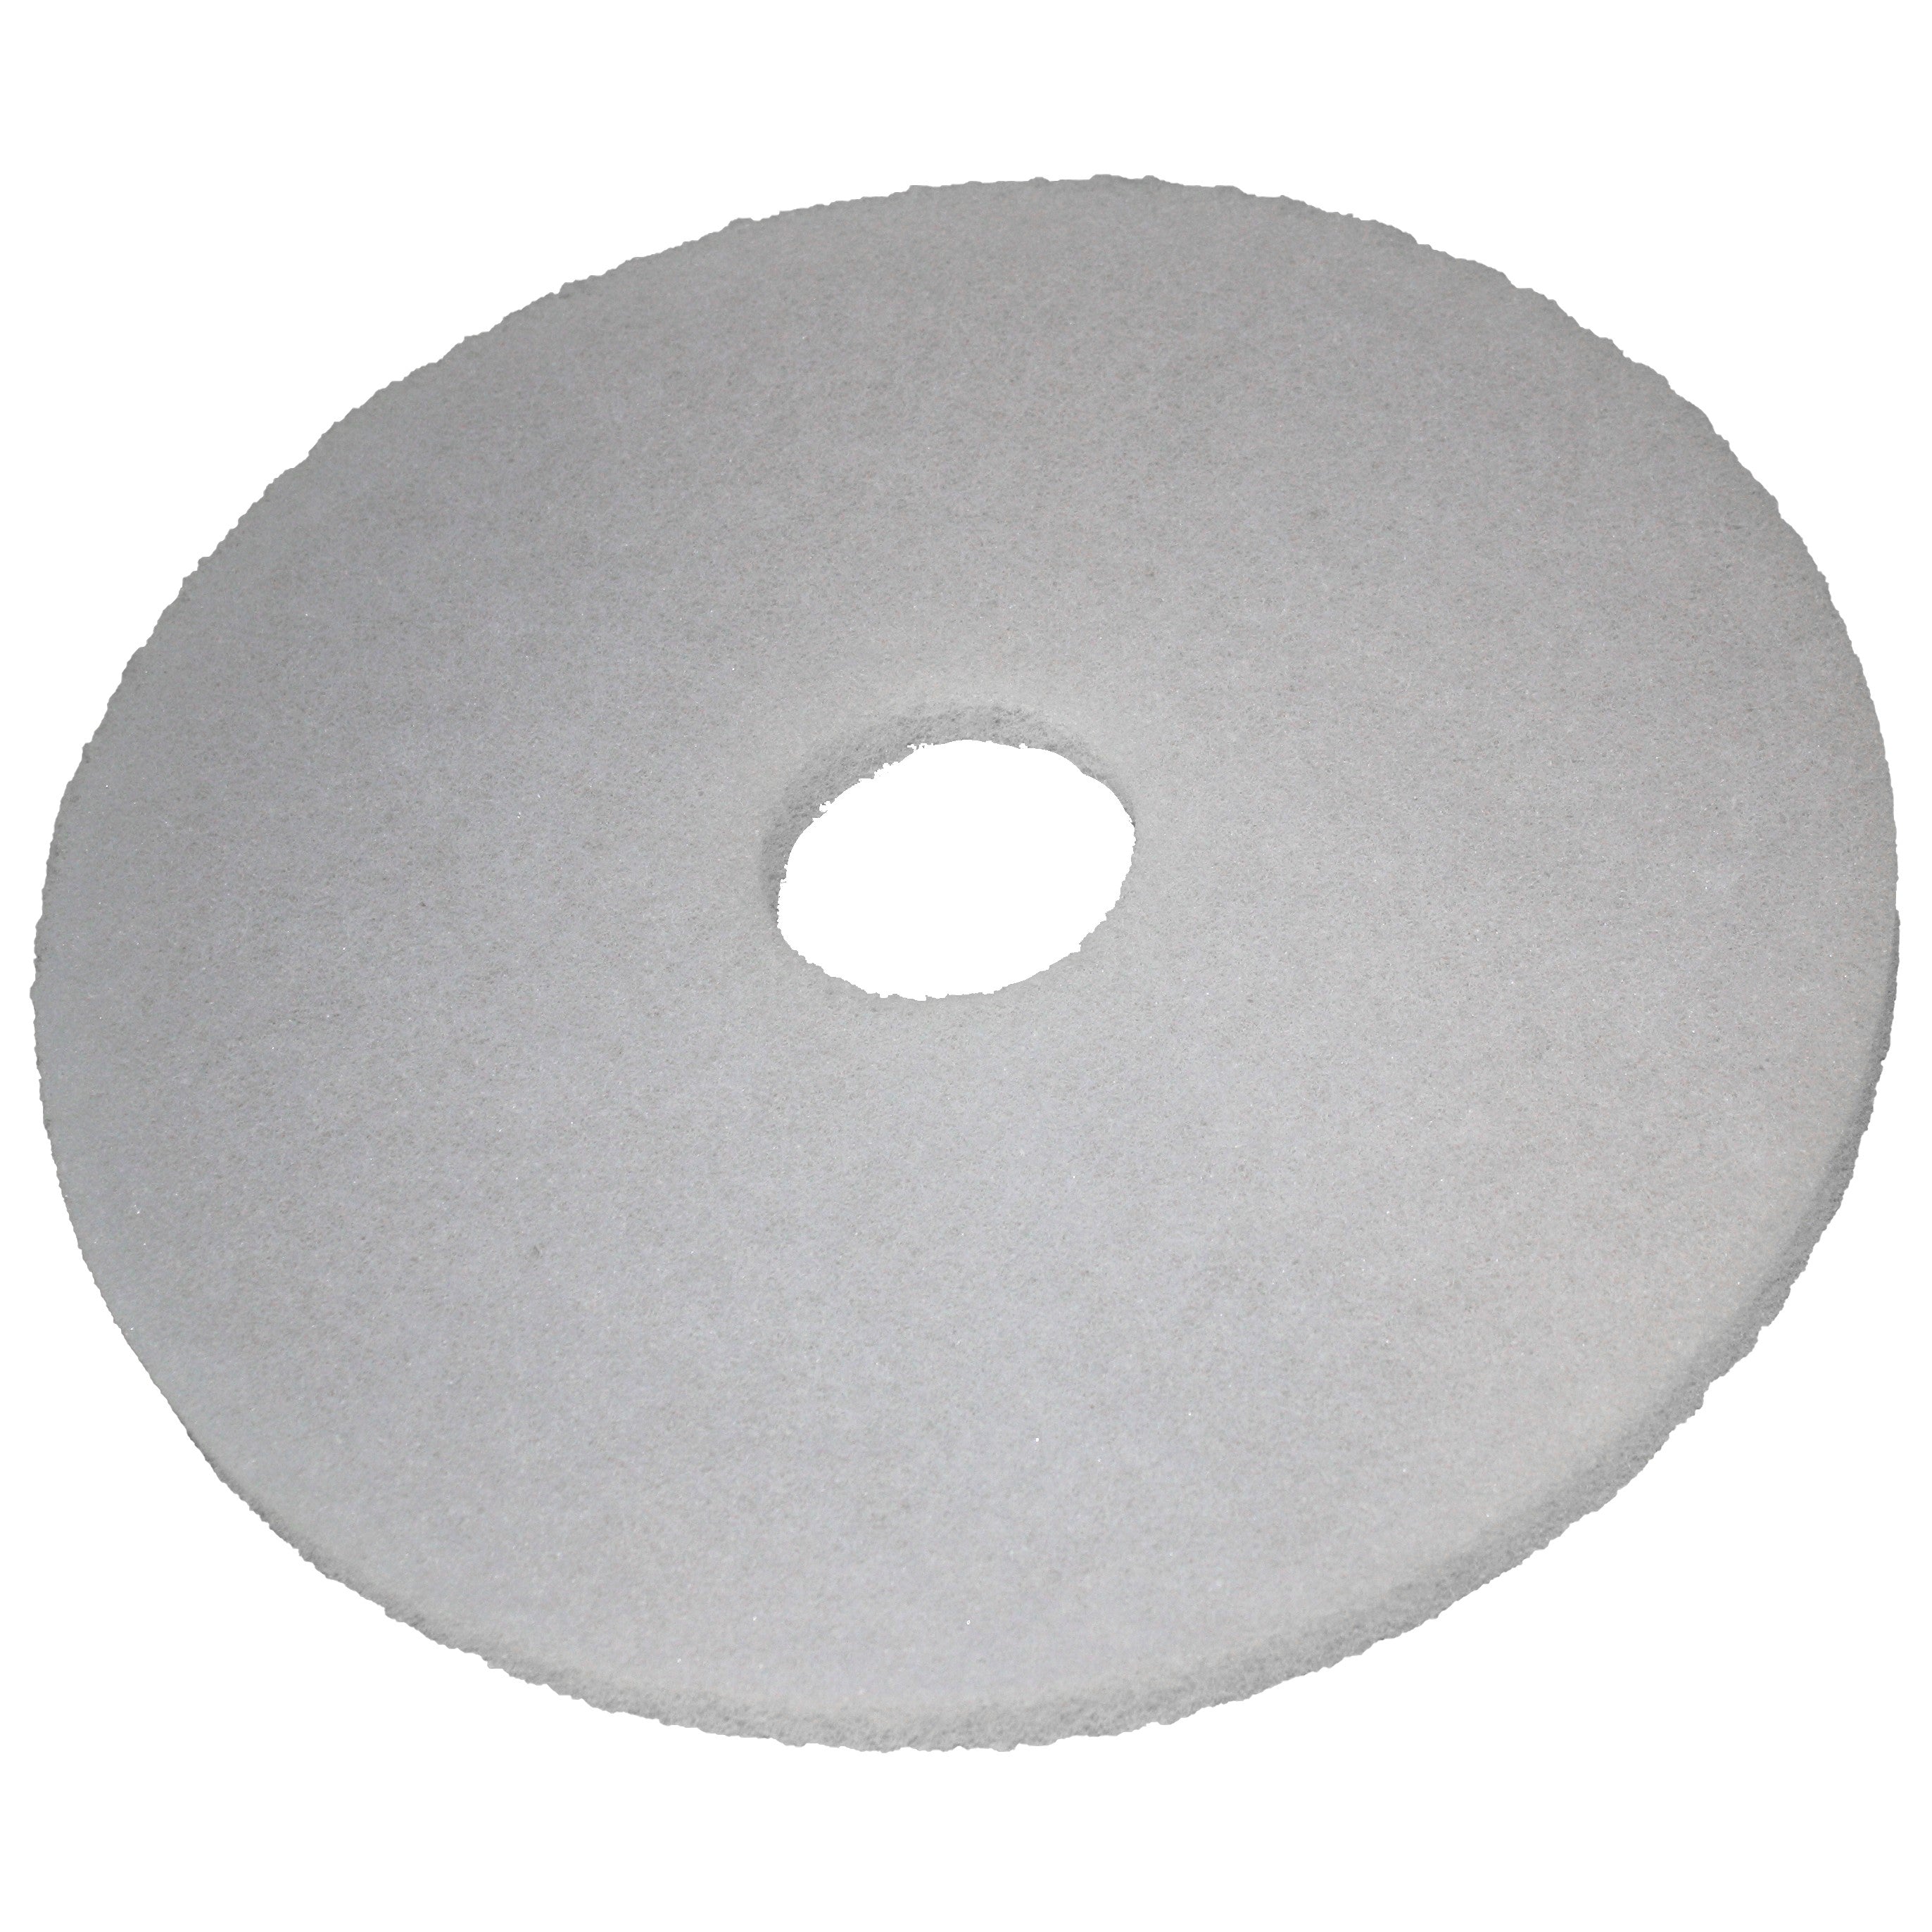 Pad weiss, Ø 152 mm, Polyester